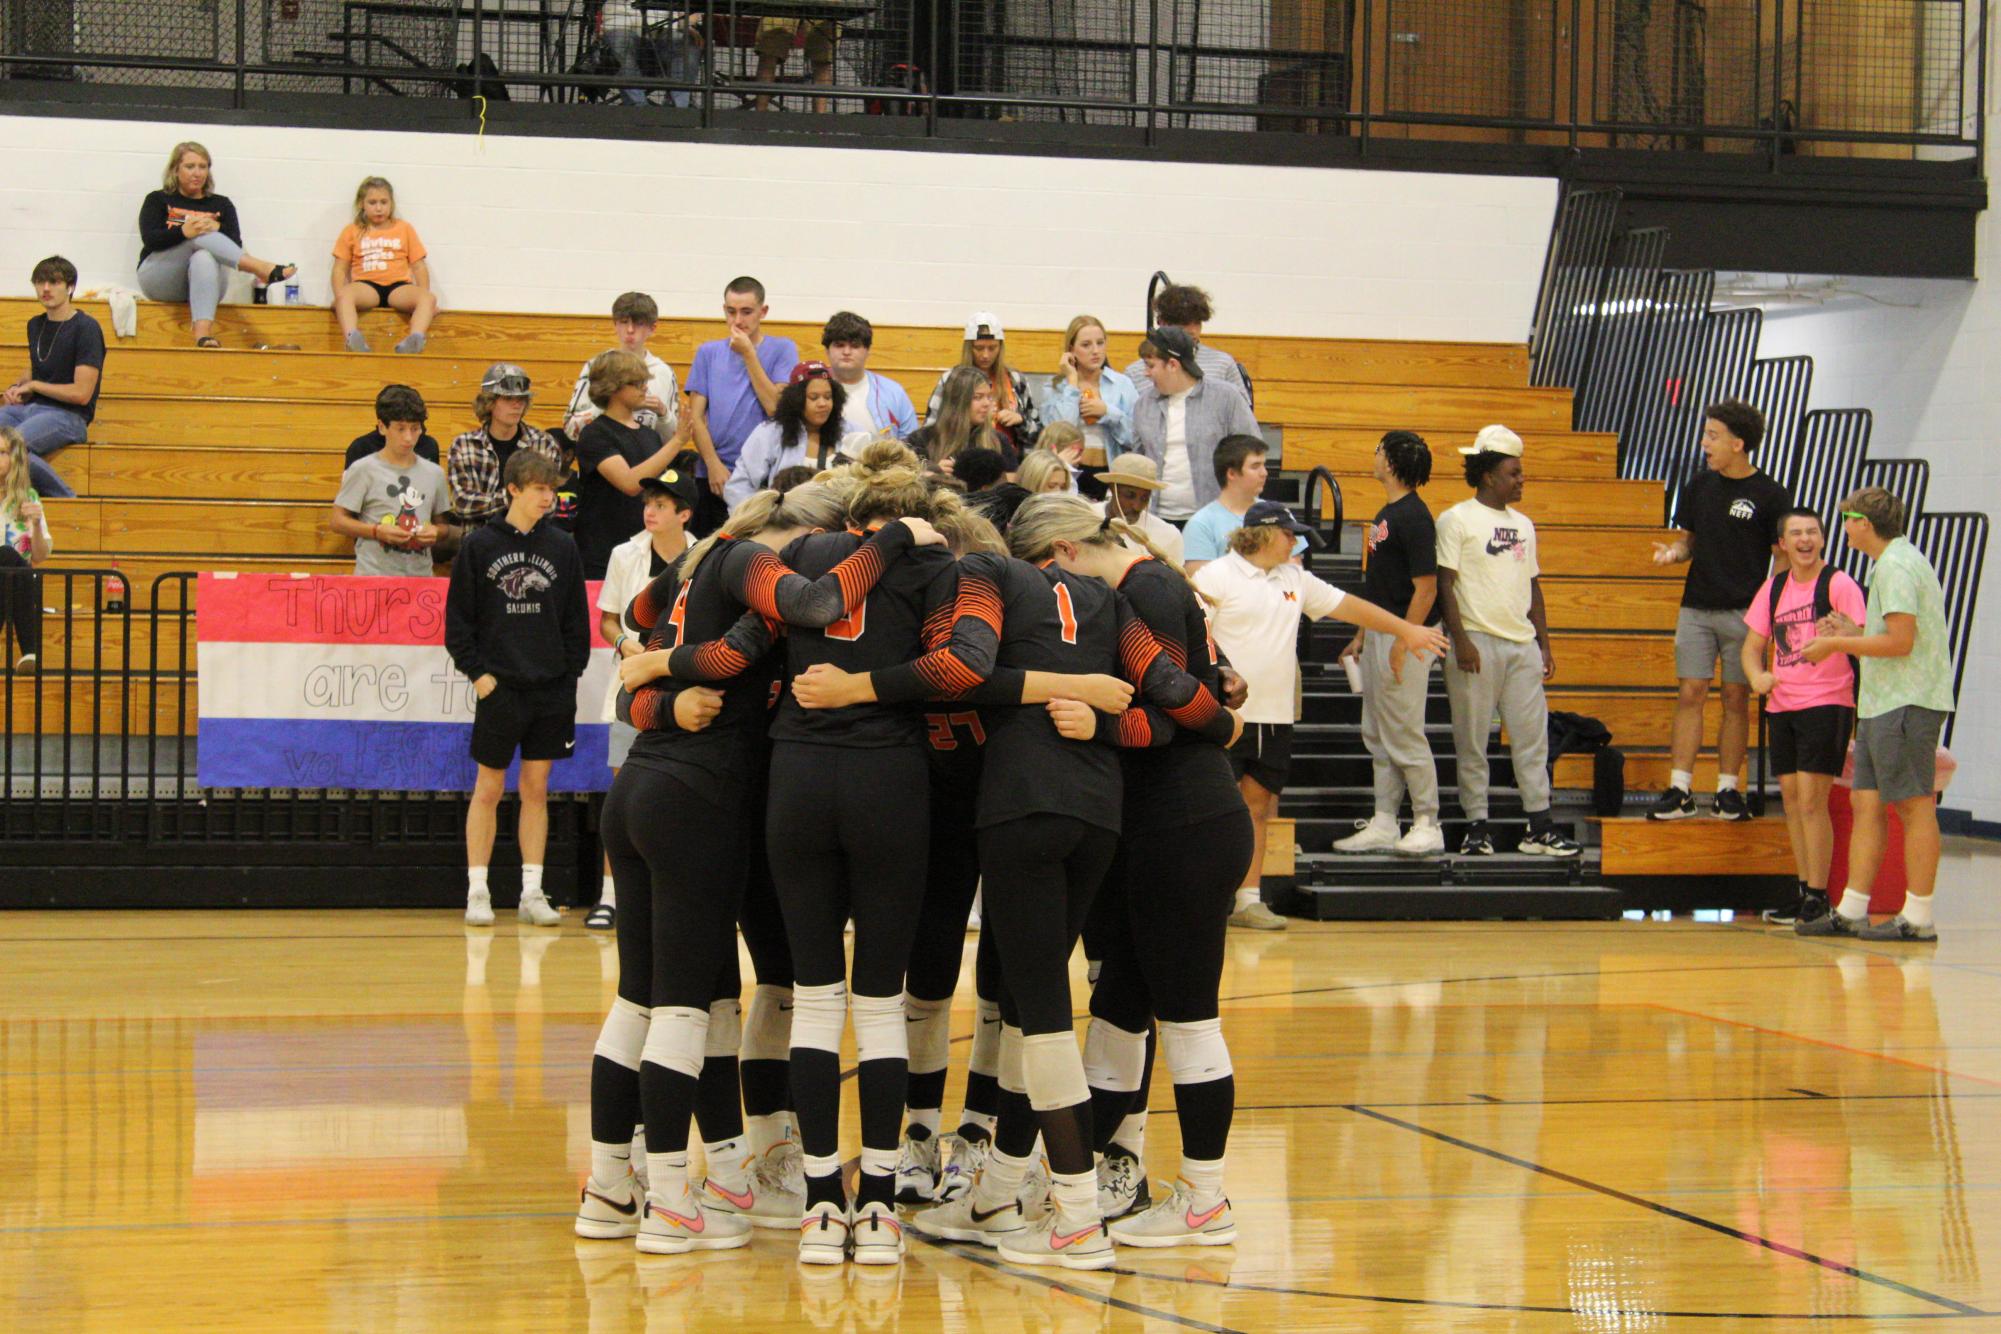 The volleyball teams huddles during their match against Johnston City.